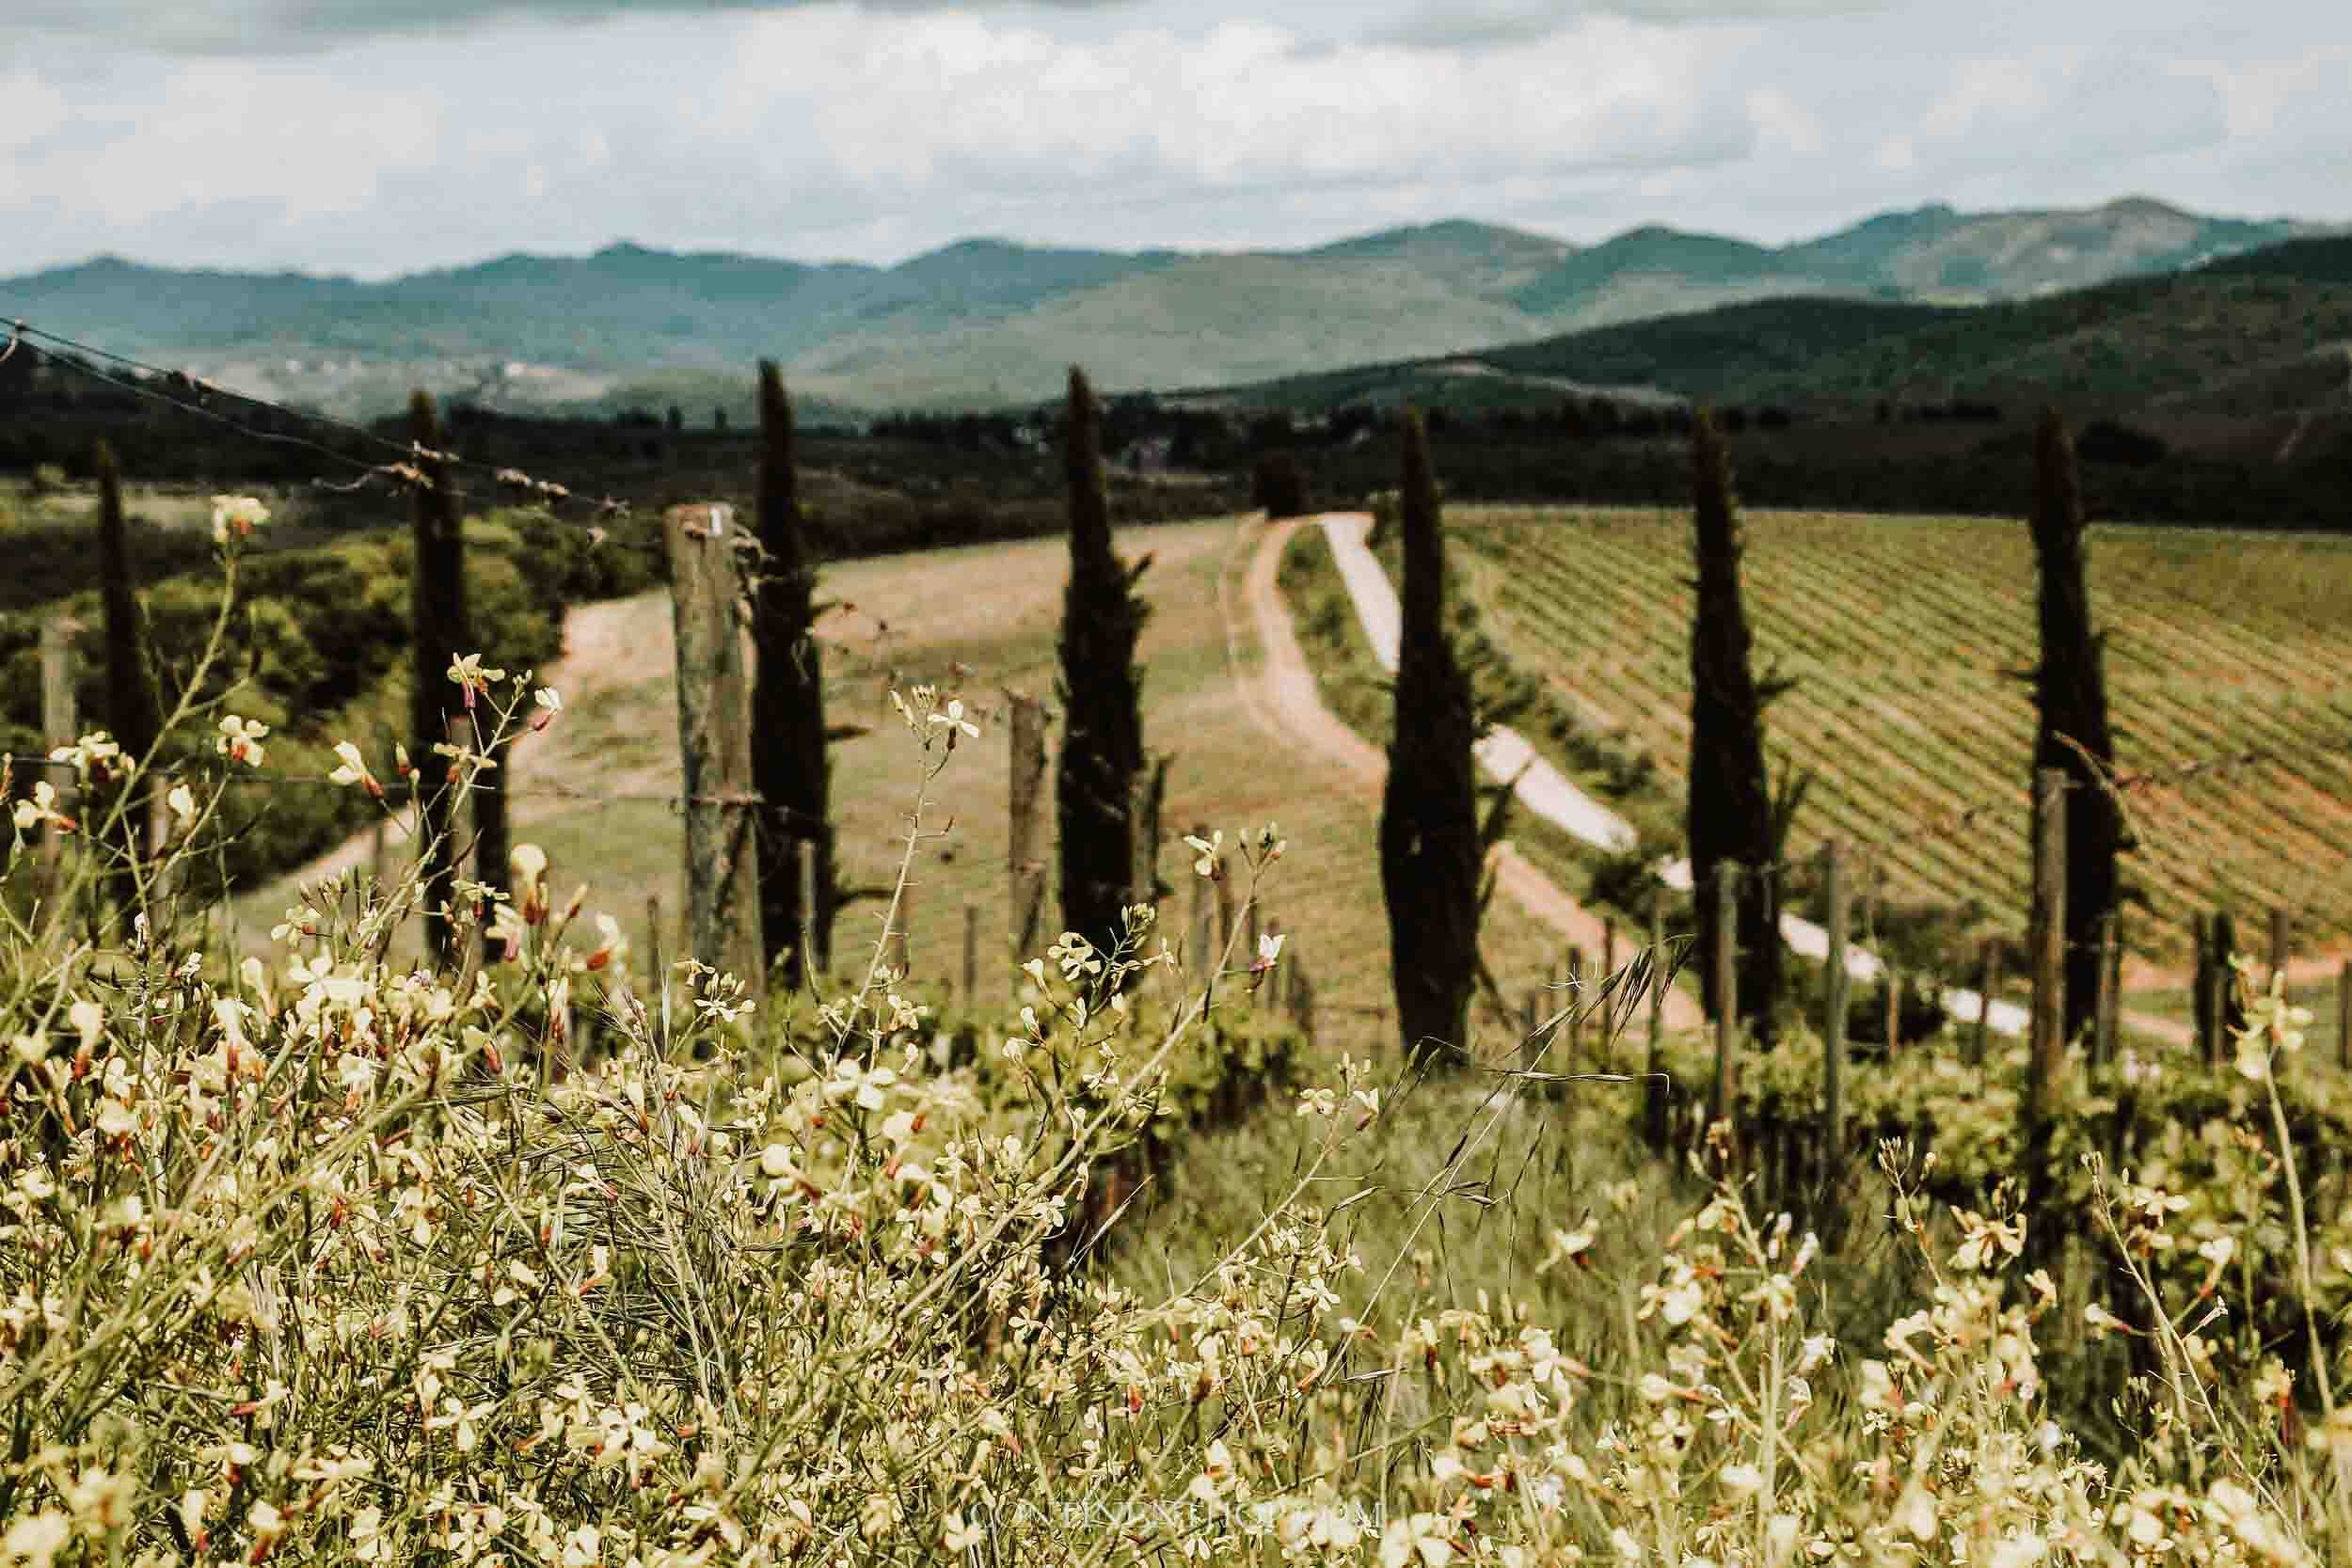 Rows of vineyards in Tuscany one of the hottest places in May Europe